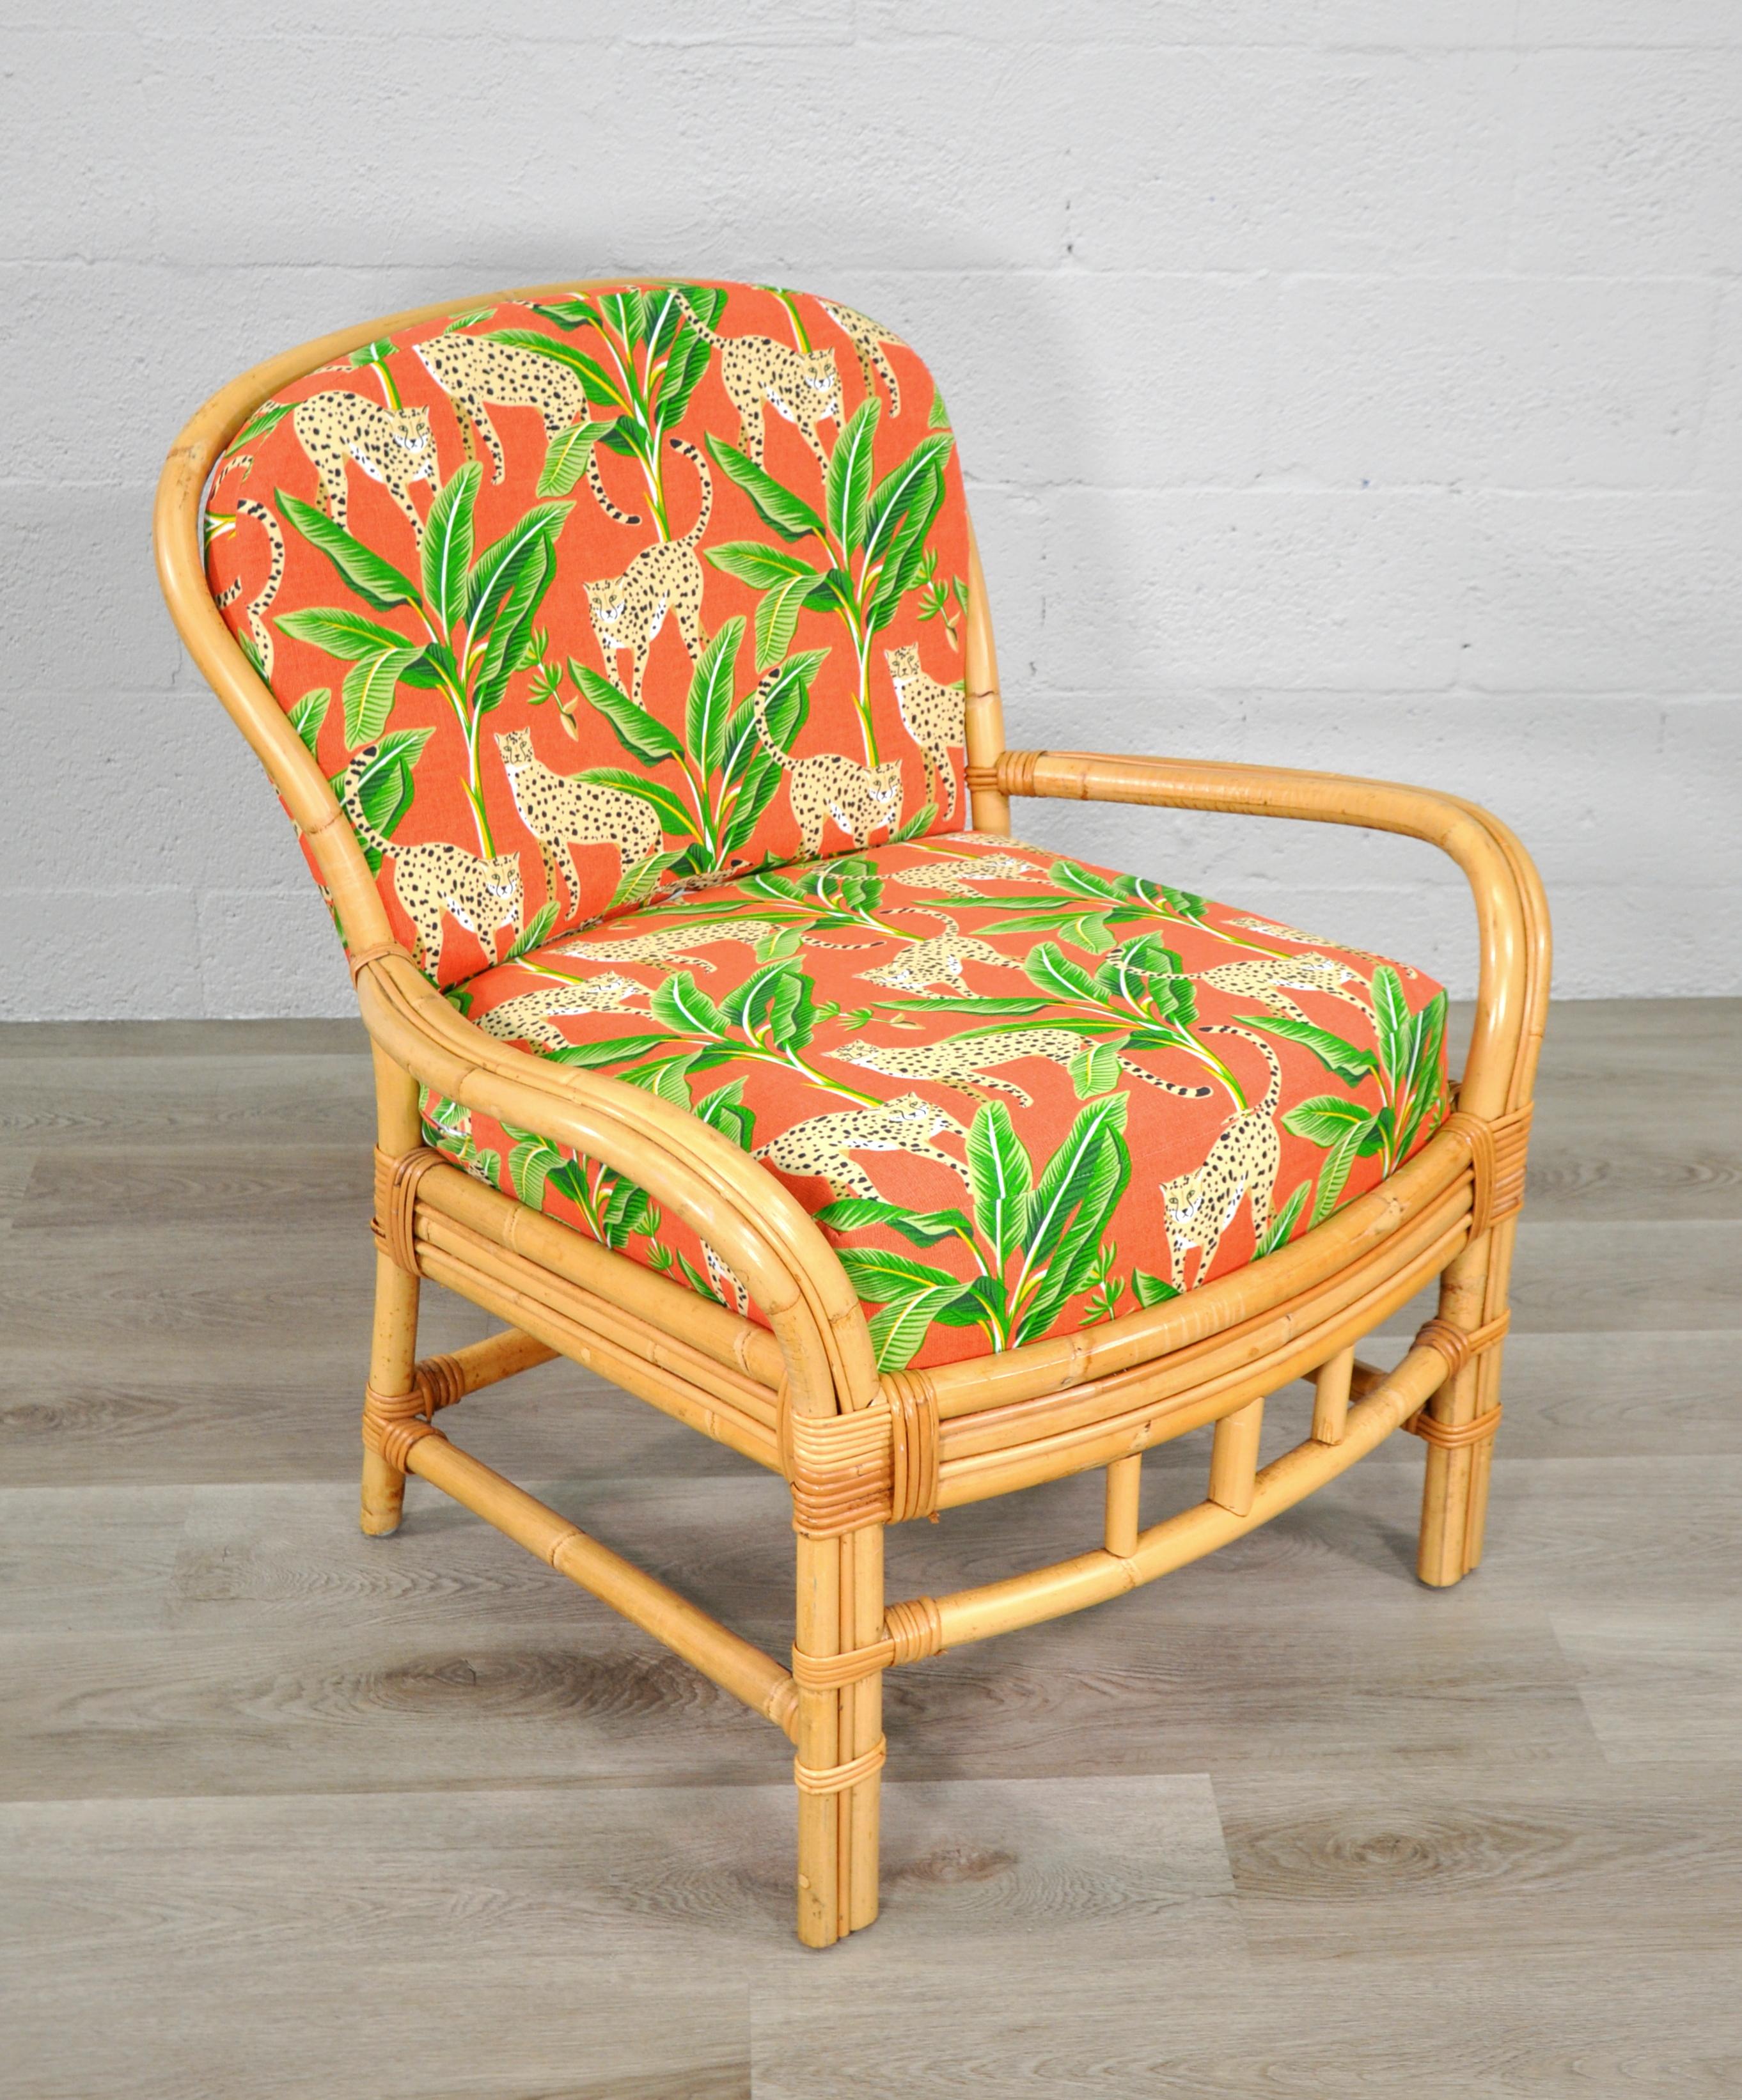 Mid-Century Modern Rattan Chair with Tropical Cheetah and Palm Fabric For Sale